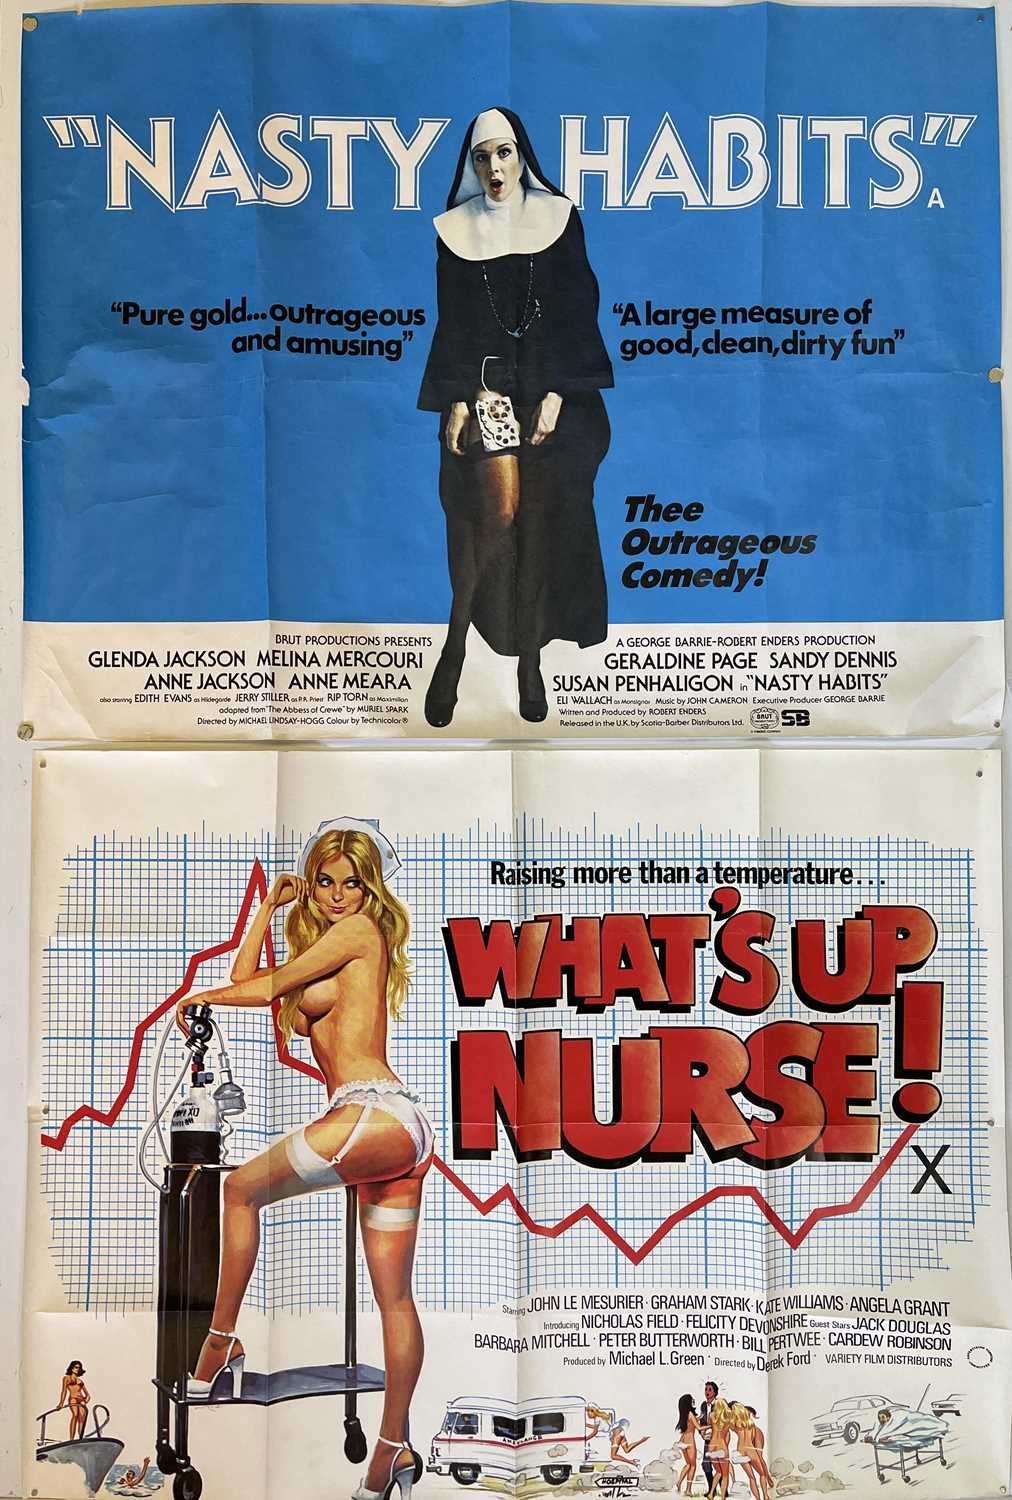 Lot 158 - WHAT'S UP NURSE / NASTY HABITS FILM POSTERS.